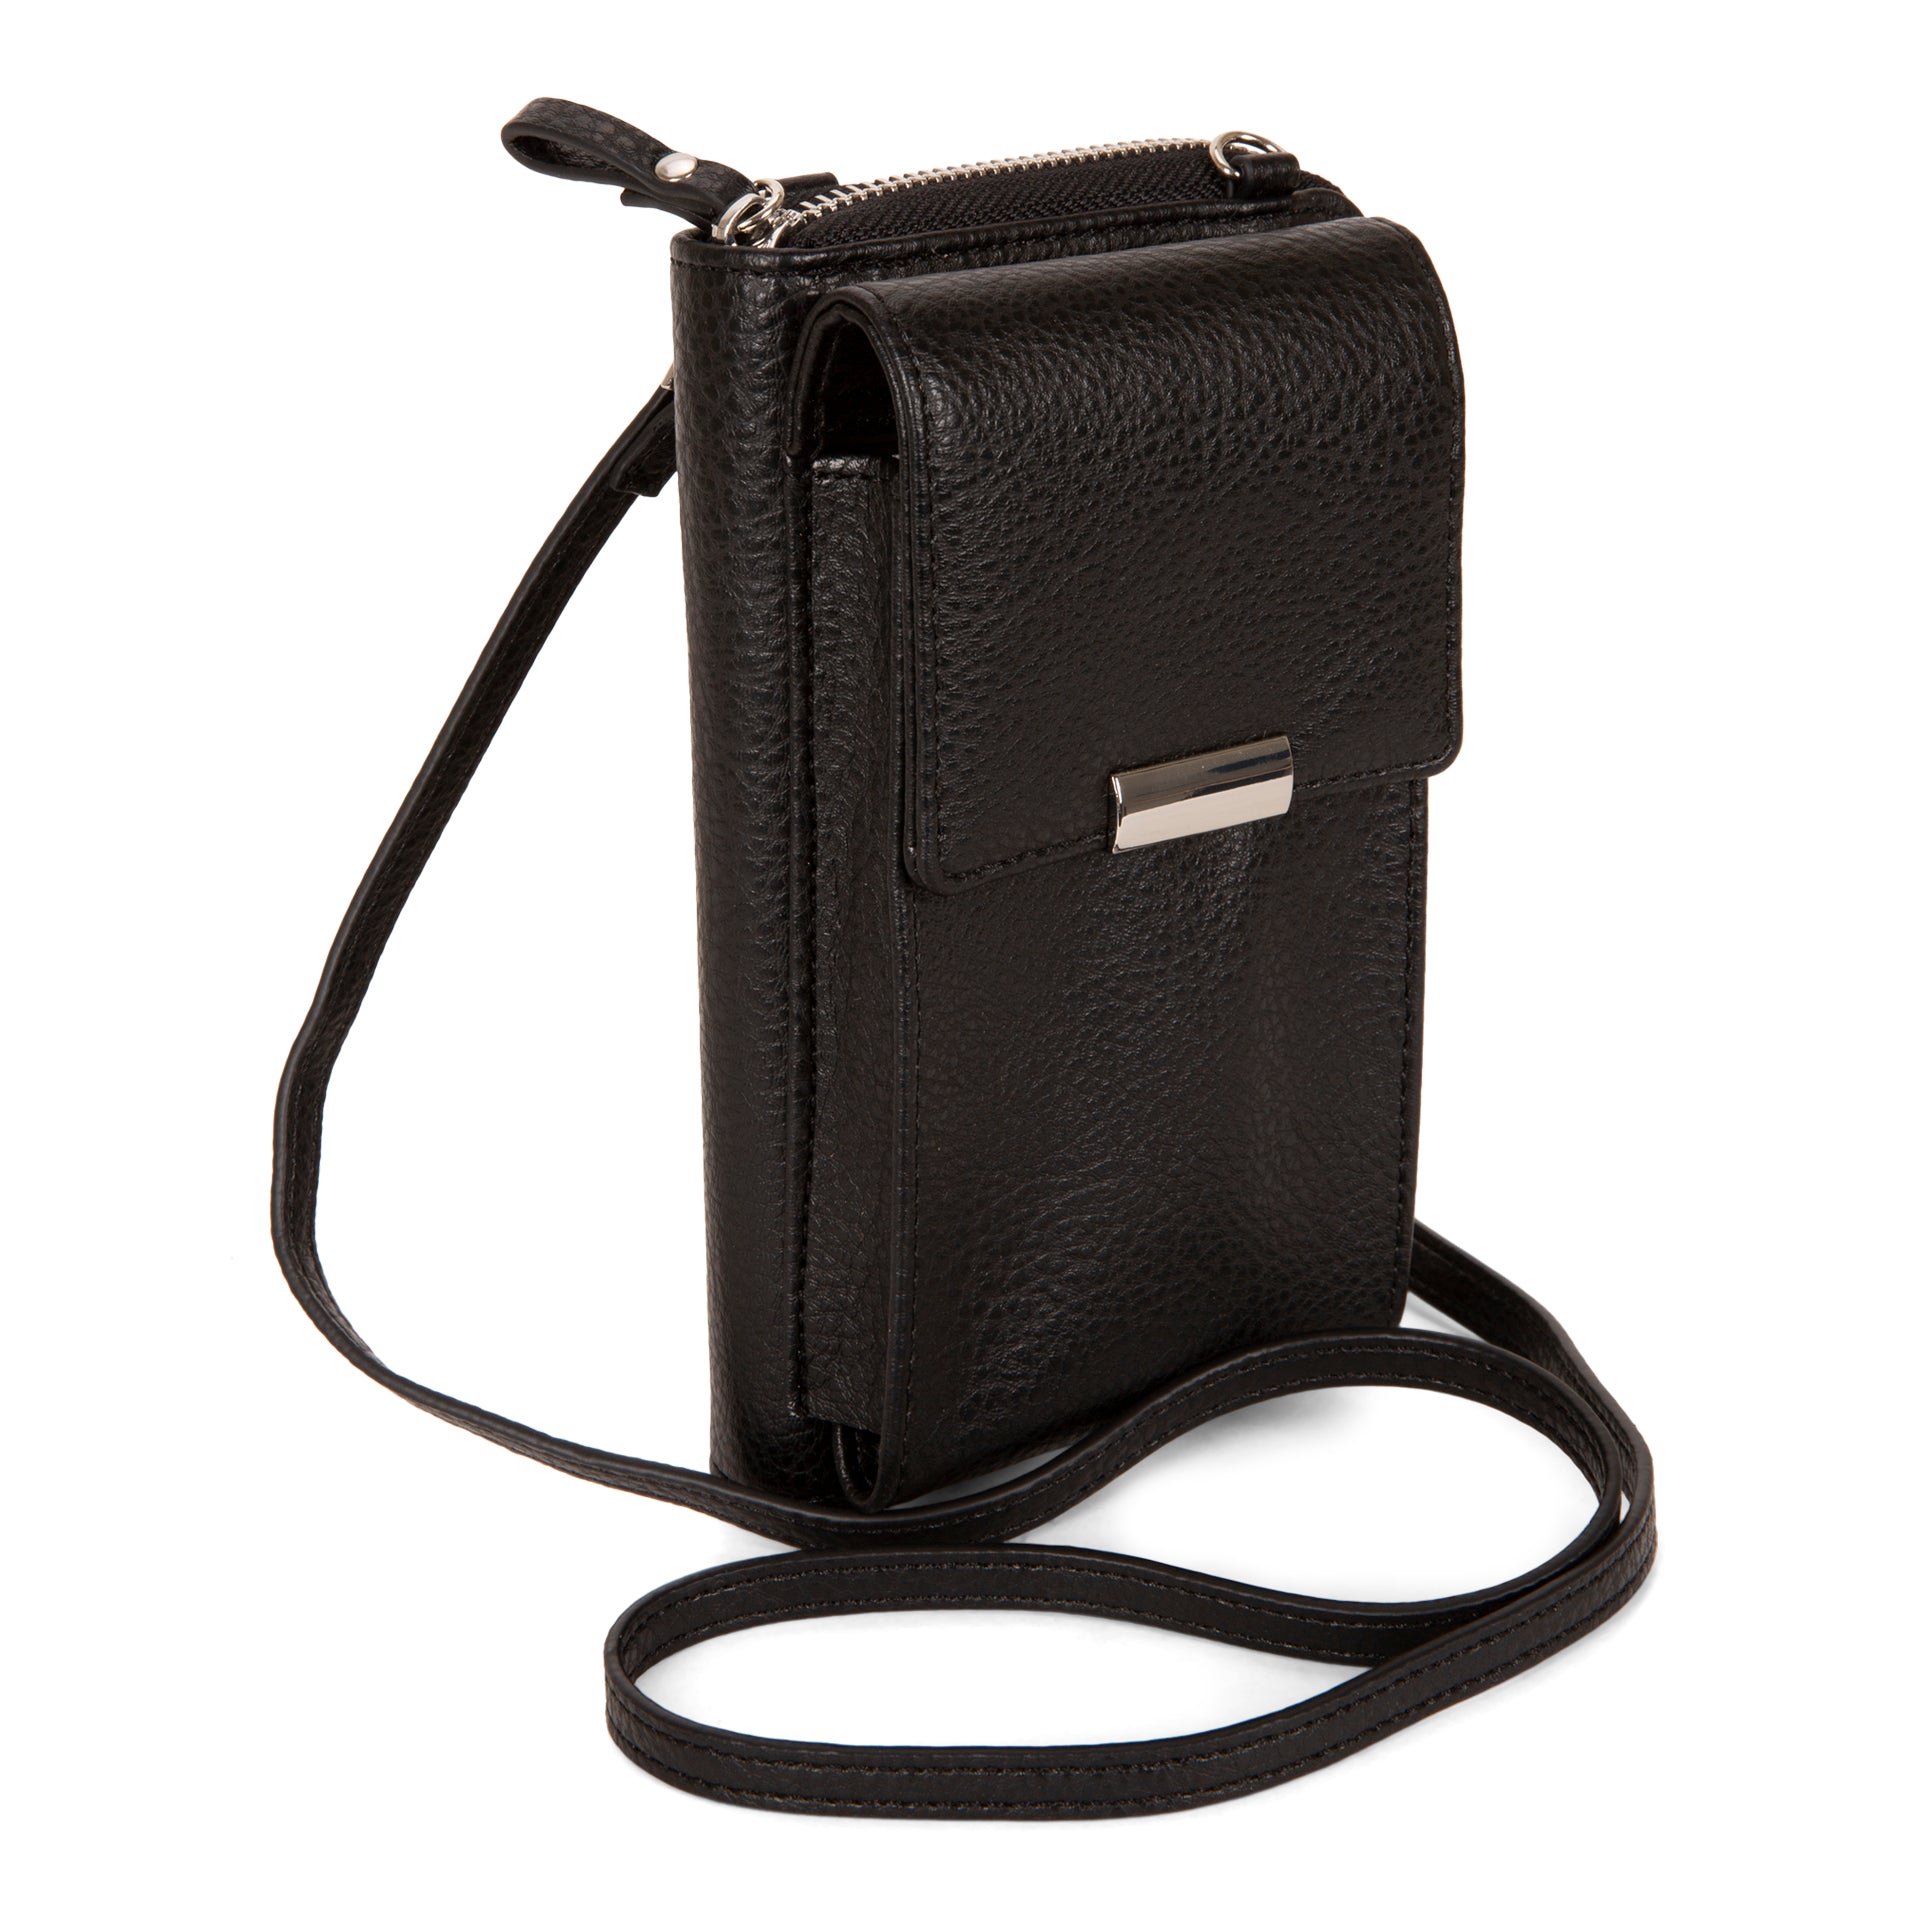 Black quilted leather coin purse | The Kooples - Canada